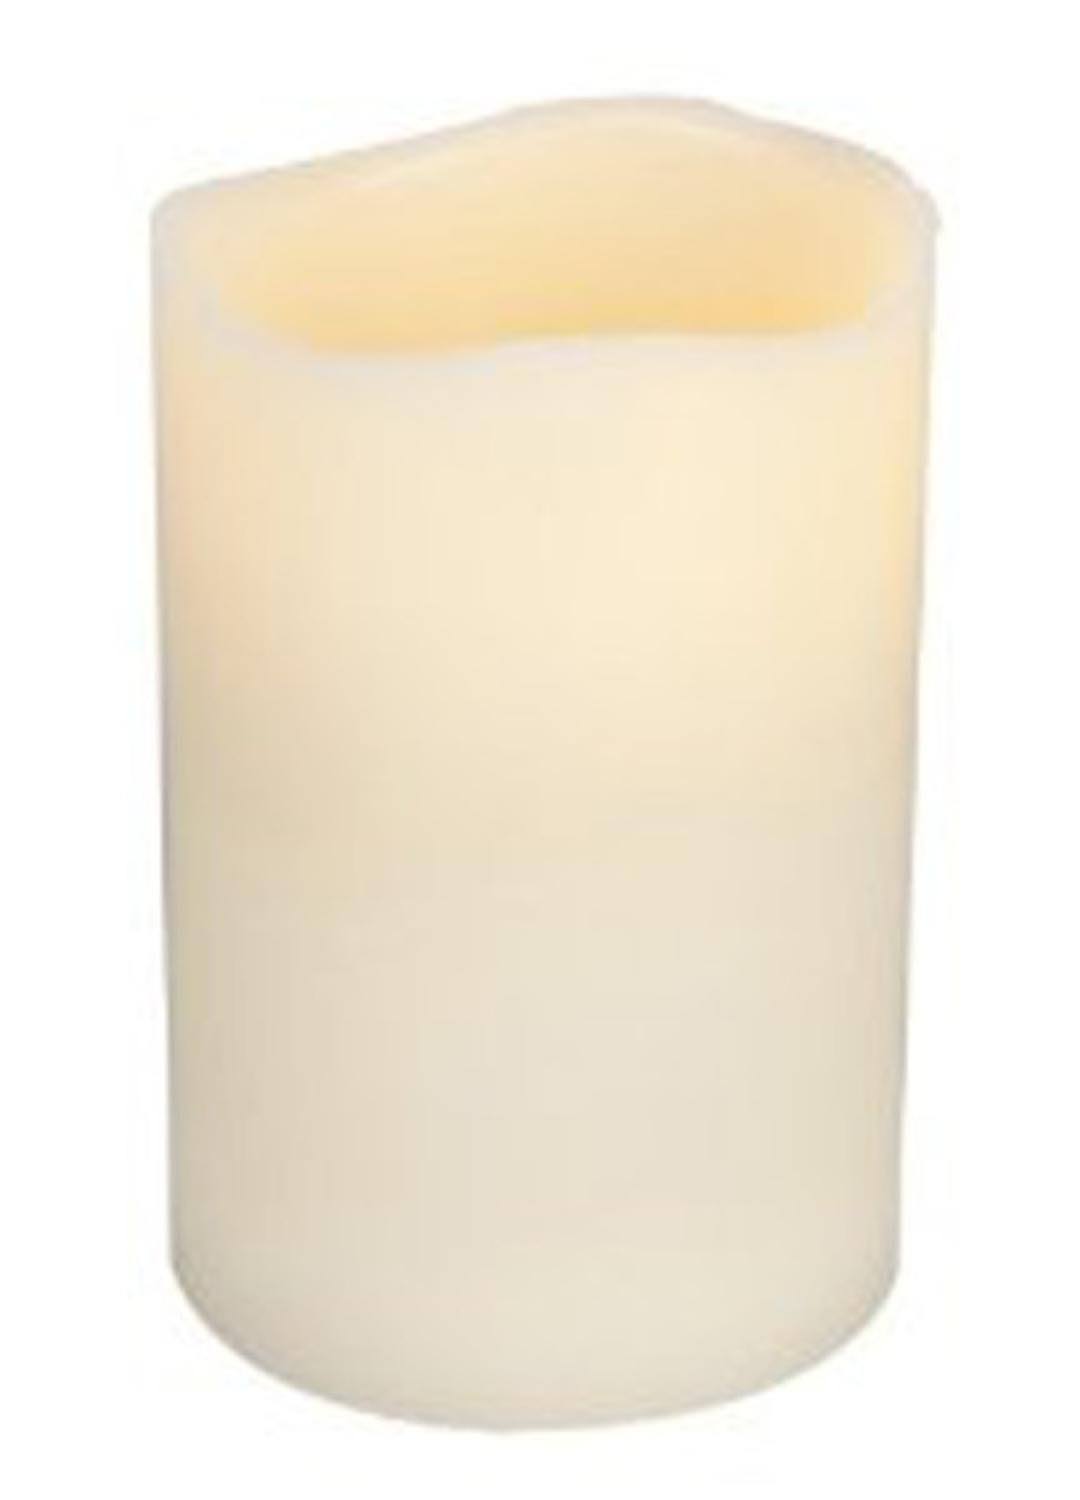 Gerson 6" Large Beige Bisque LED Lighted Battery Operated Flameless Wax Vanilla Scented Pillar Candle